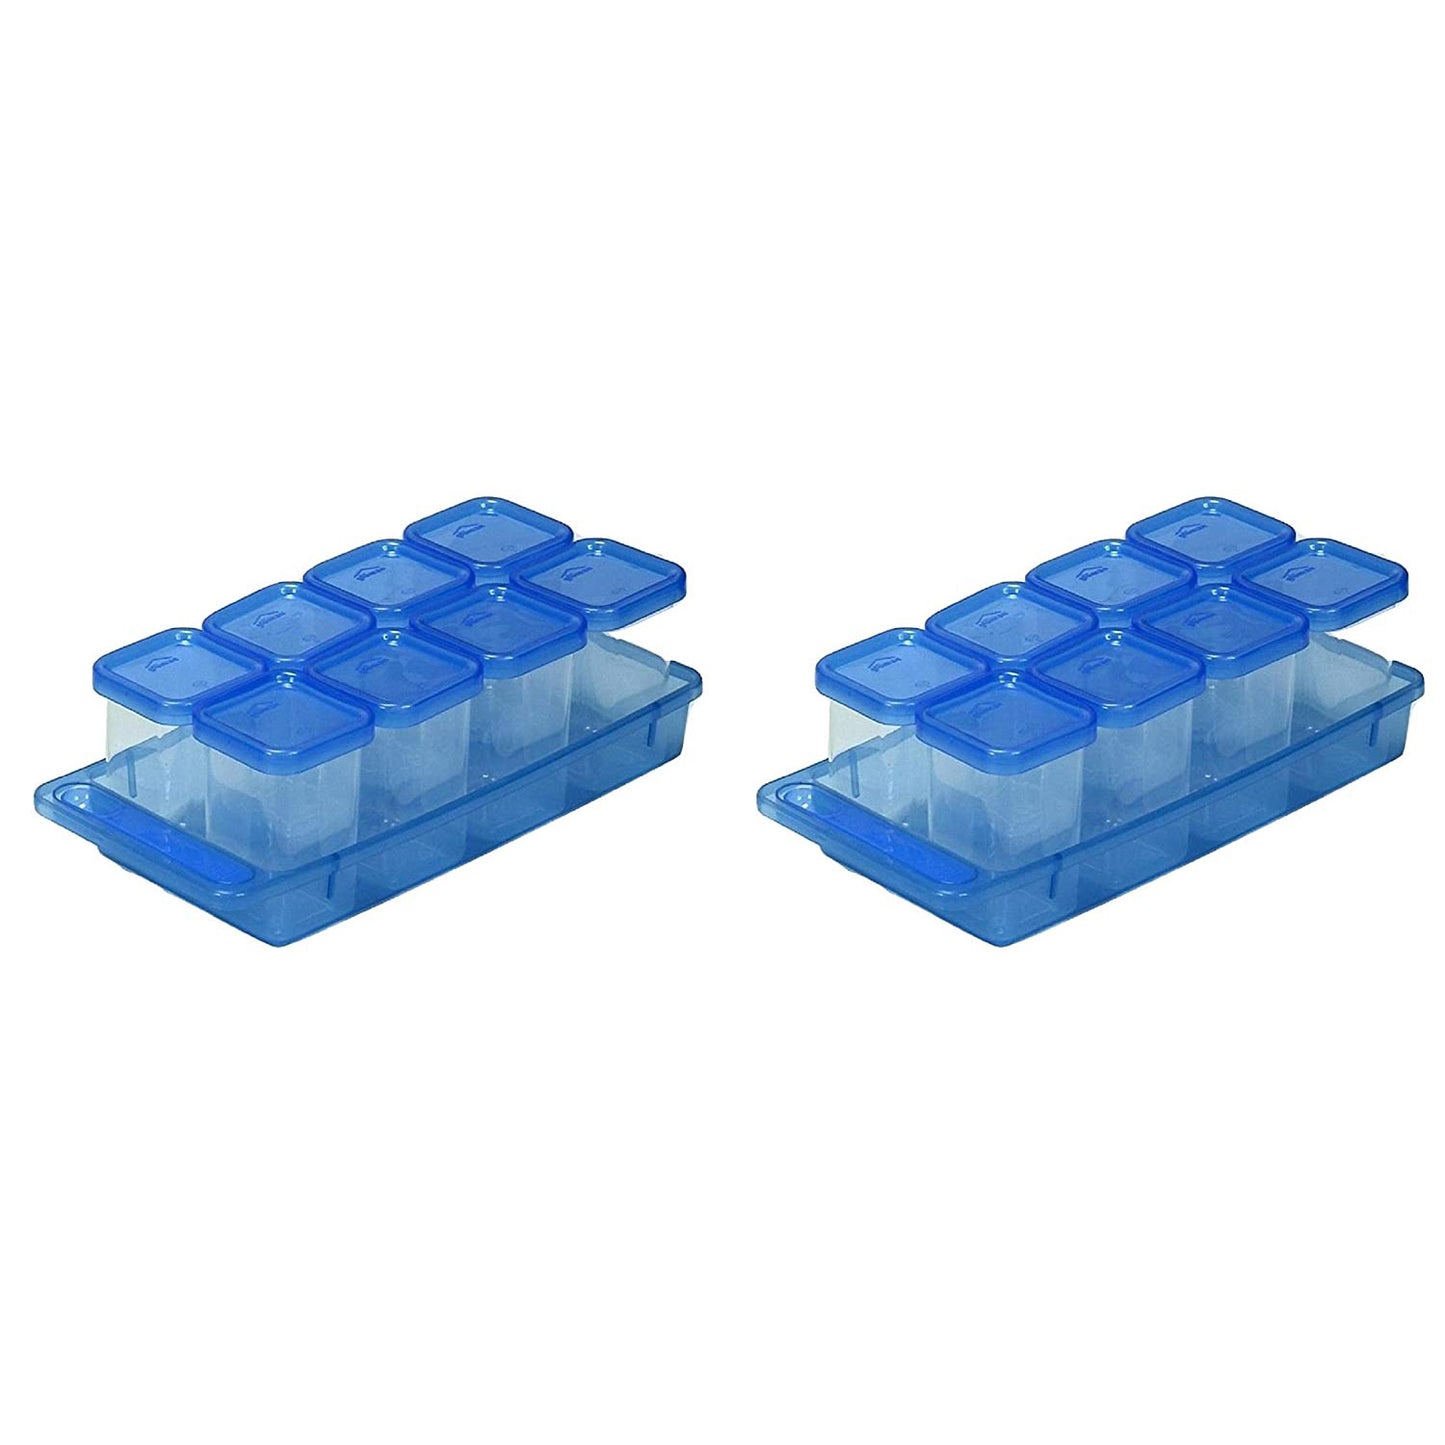 Gluman Masala Container Set Pack of 2 - Blue